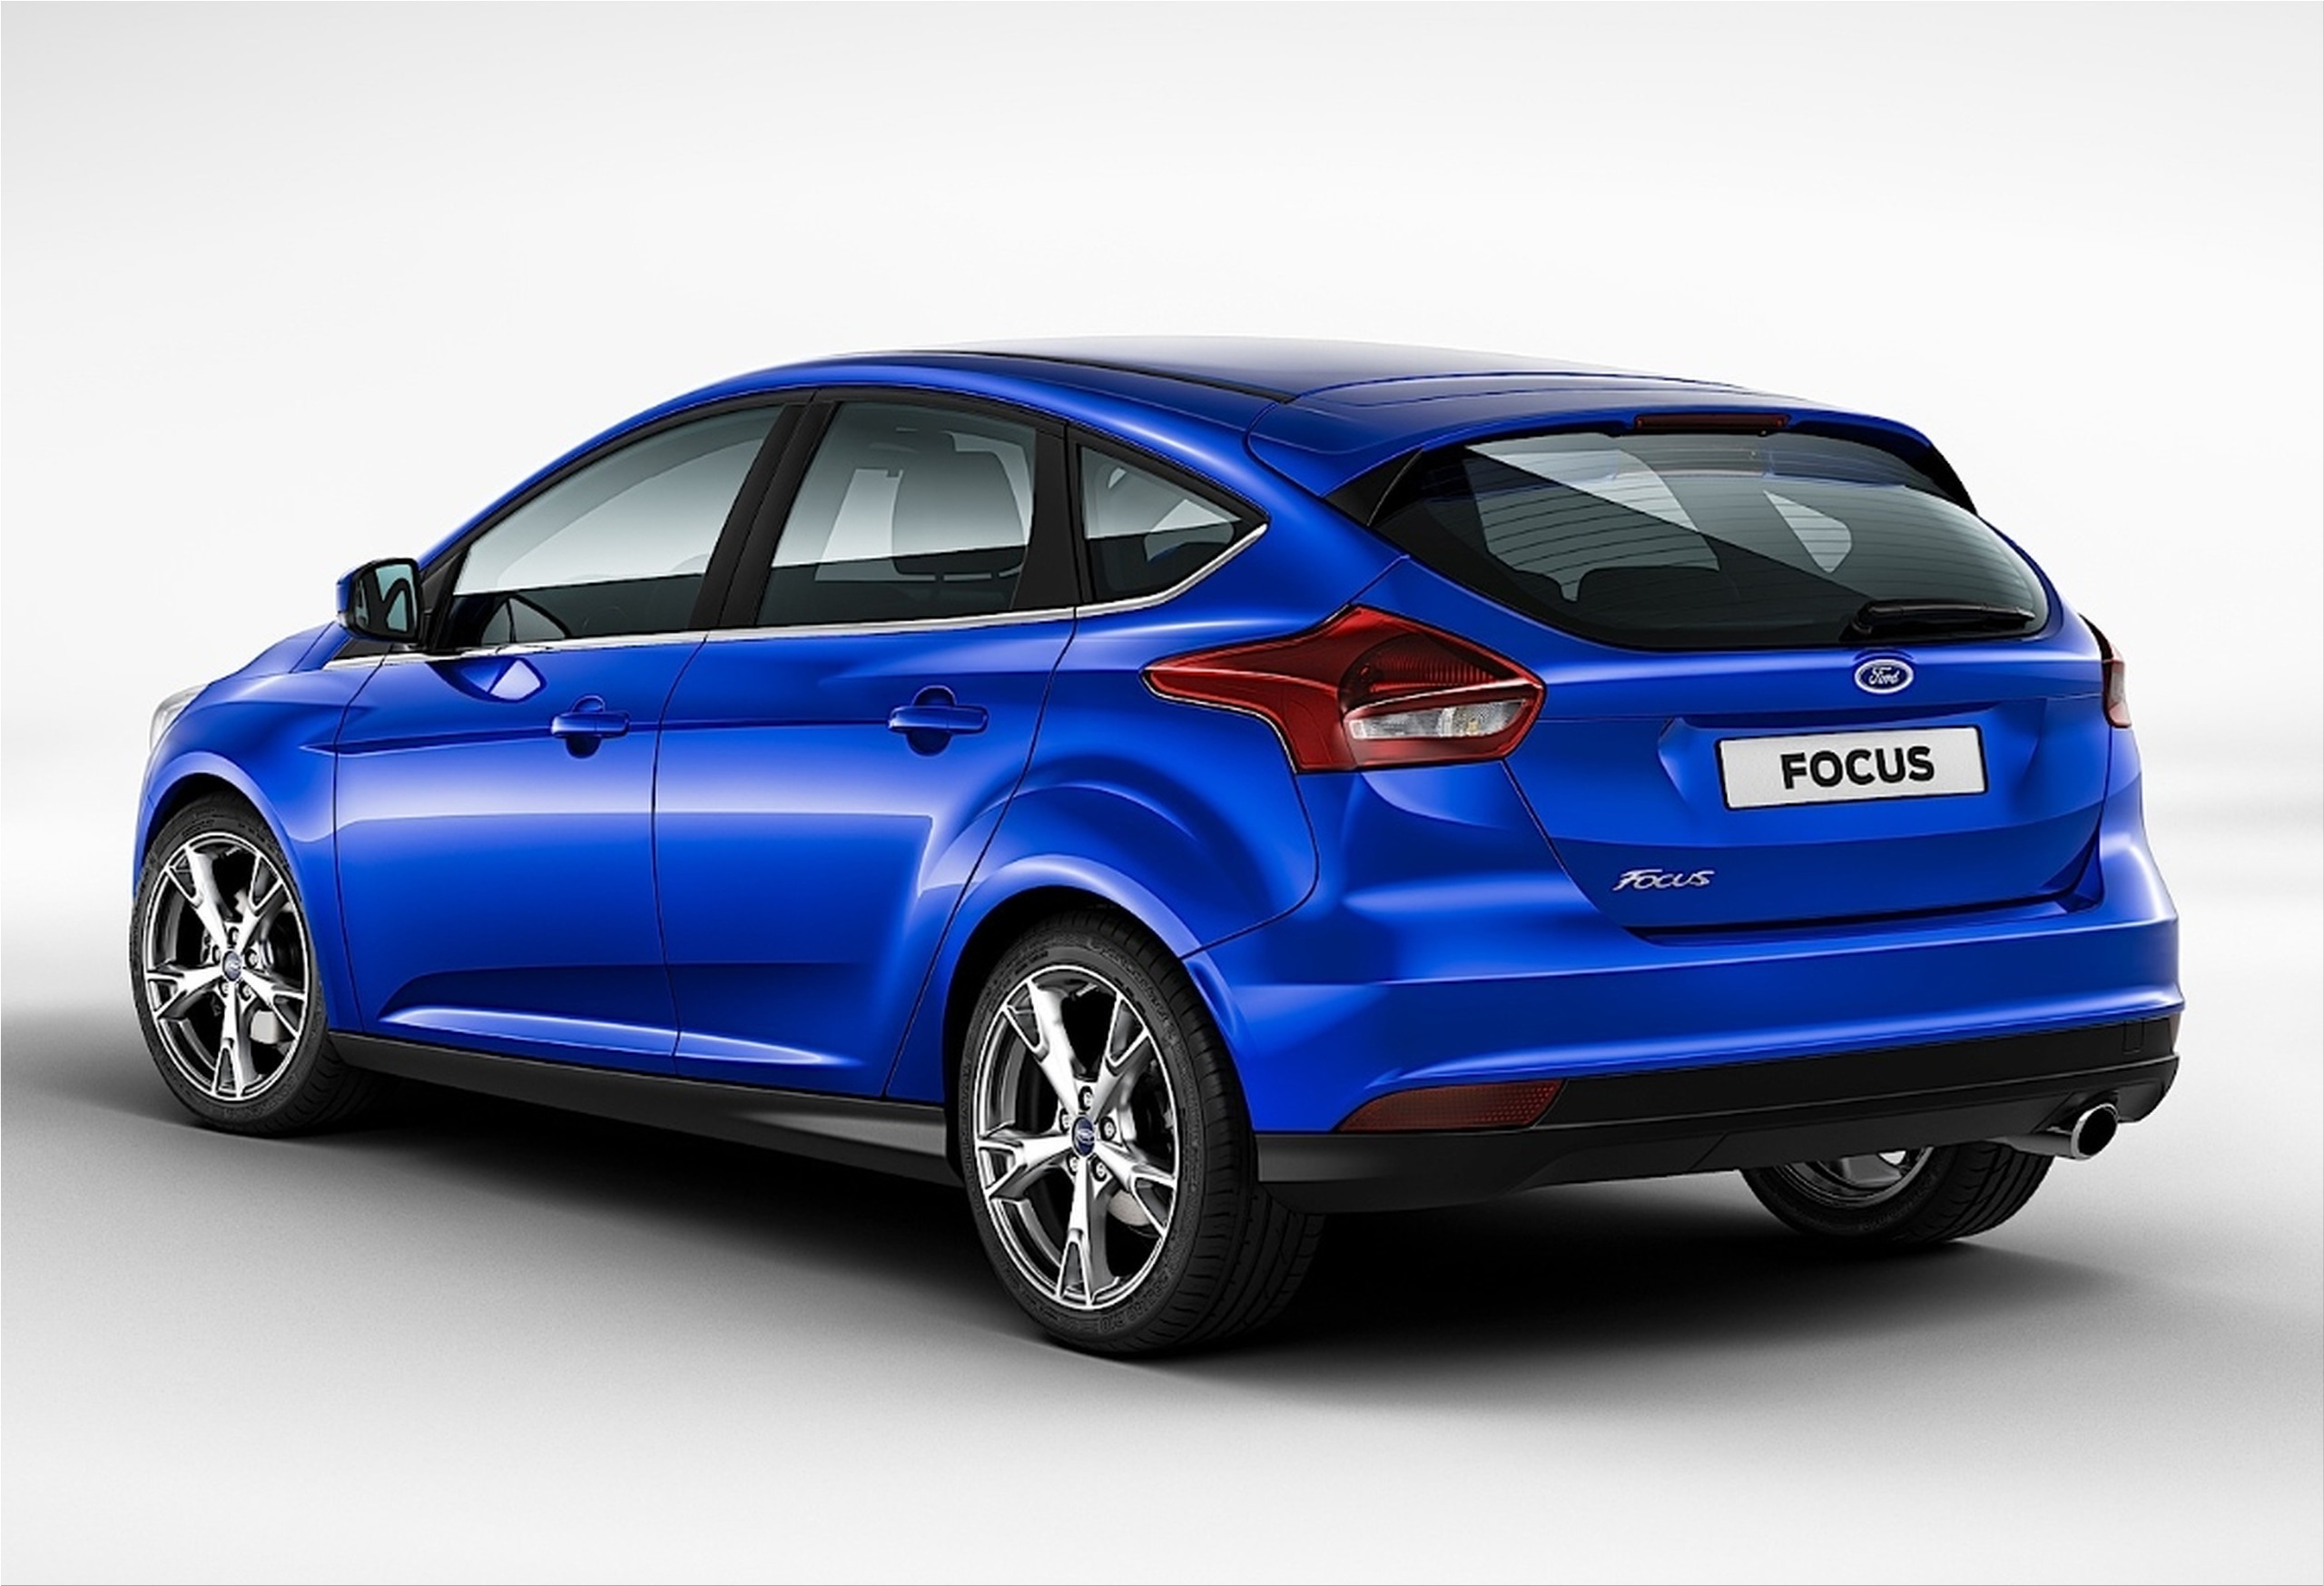 Ford Focus production will end in 2025